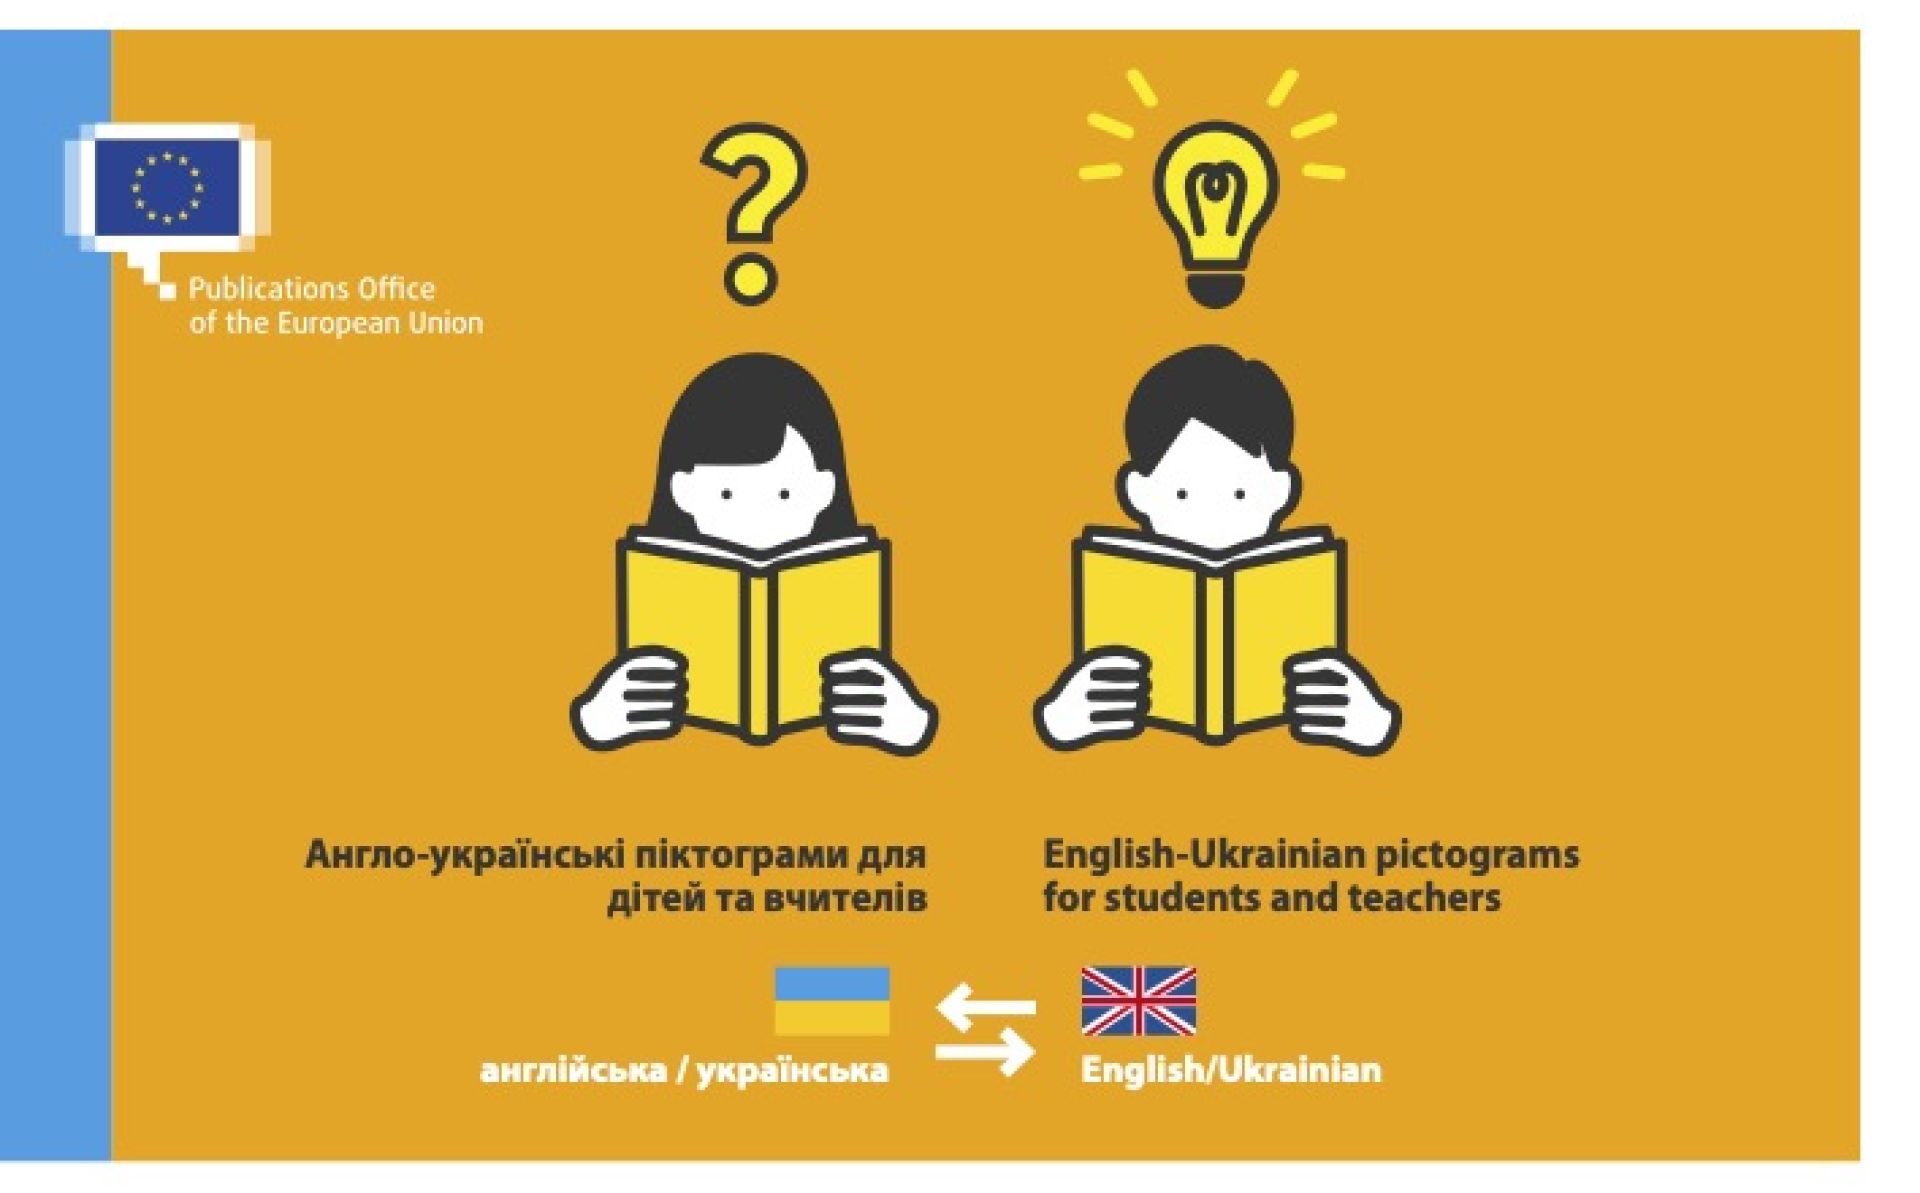 Practical booklet for Ukrainian children and EU teachers – with visuals, in all EU languages